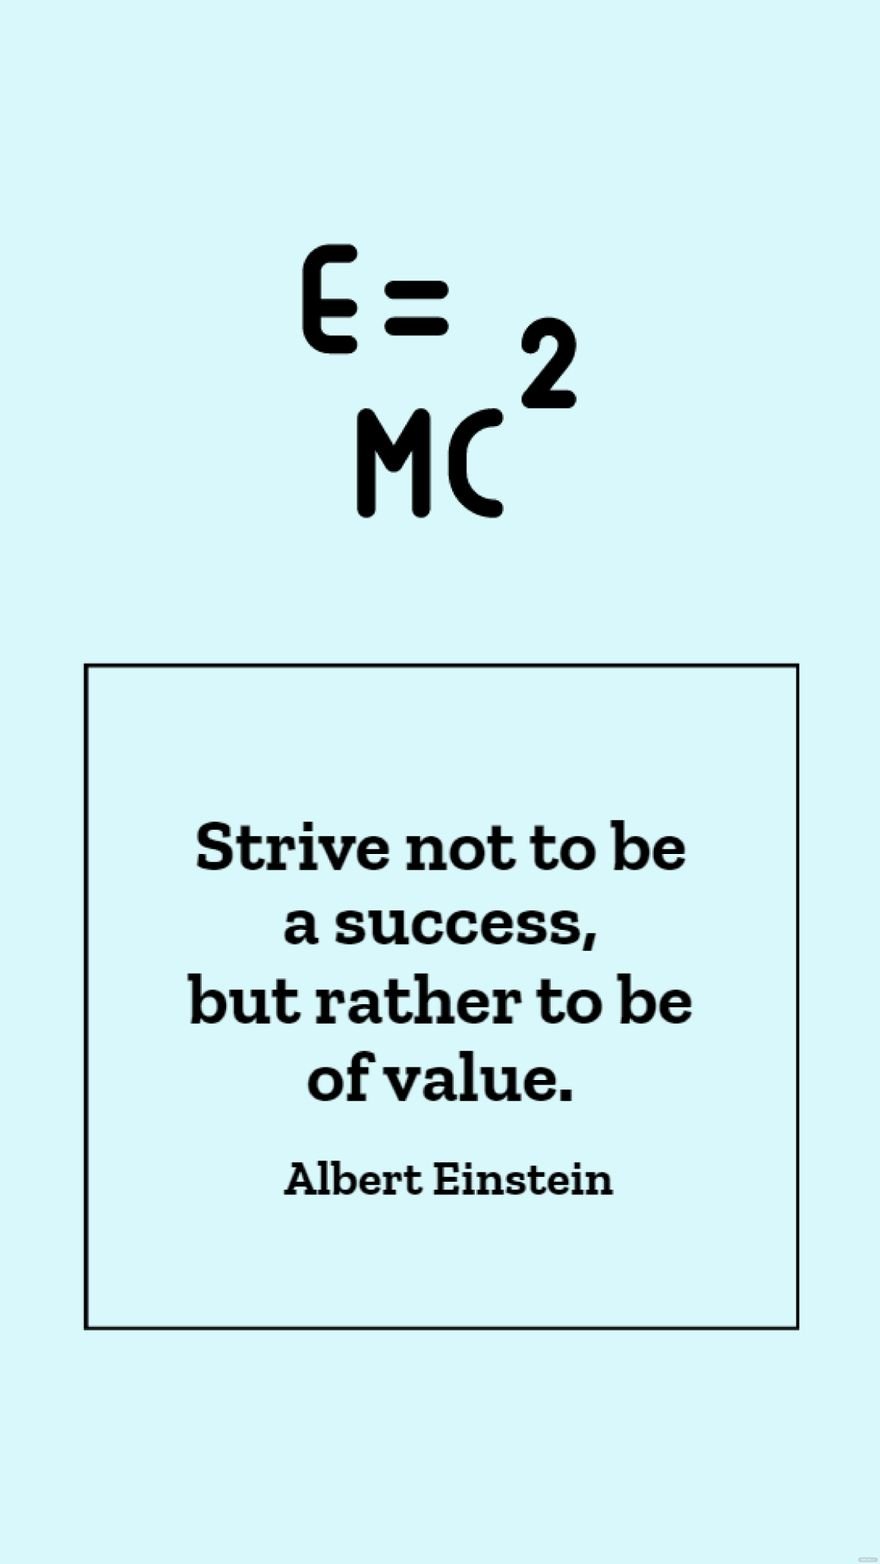 Albert Einstein - Strive not to be a success, but rather to be of value. in JPG